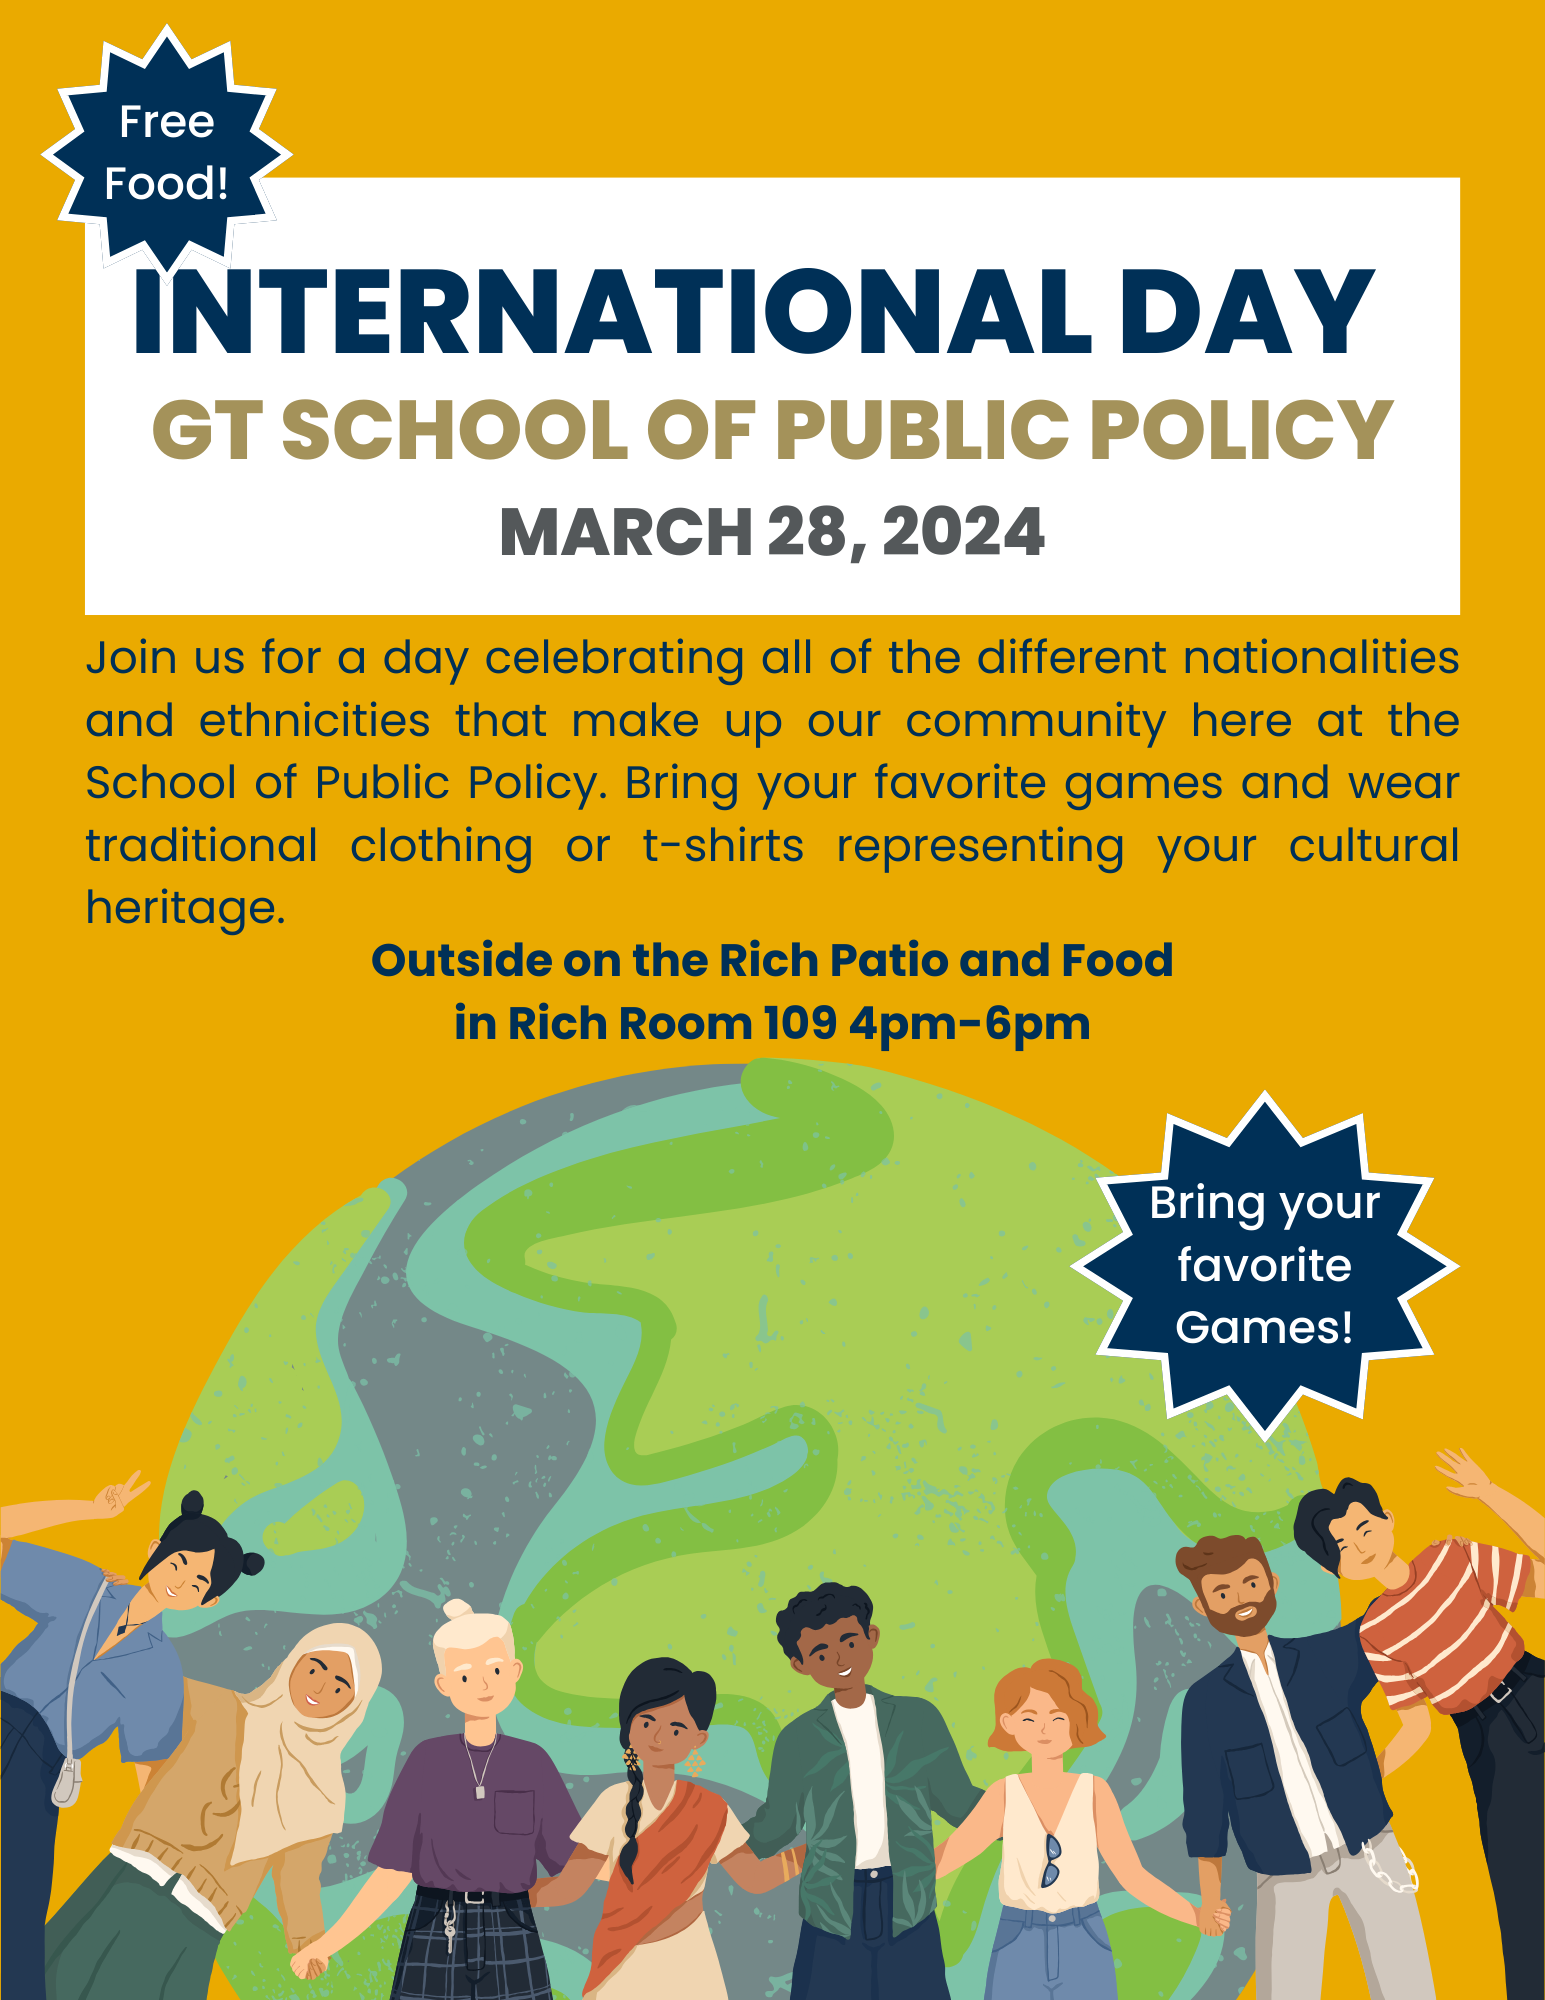 Gold Flyer displaying International Day, School of Public Policy, Join us for a day celebrating all of the different nationalities and ethnicities that make up our community here at the School of Public Policy. Bring your favorite games and wear traditional clothing or t-shirts representing your cultural heritage. Outside on the Rich Patio and Food in Rich Room 109 4pm-6pm.